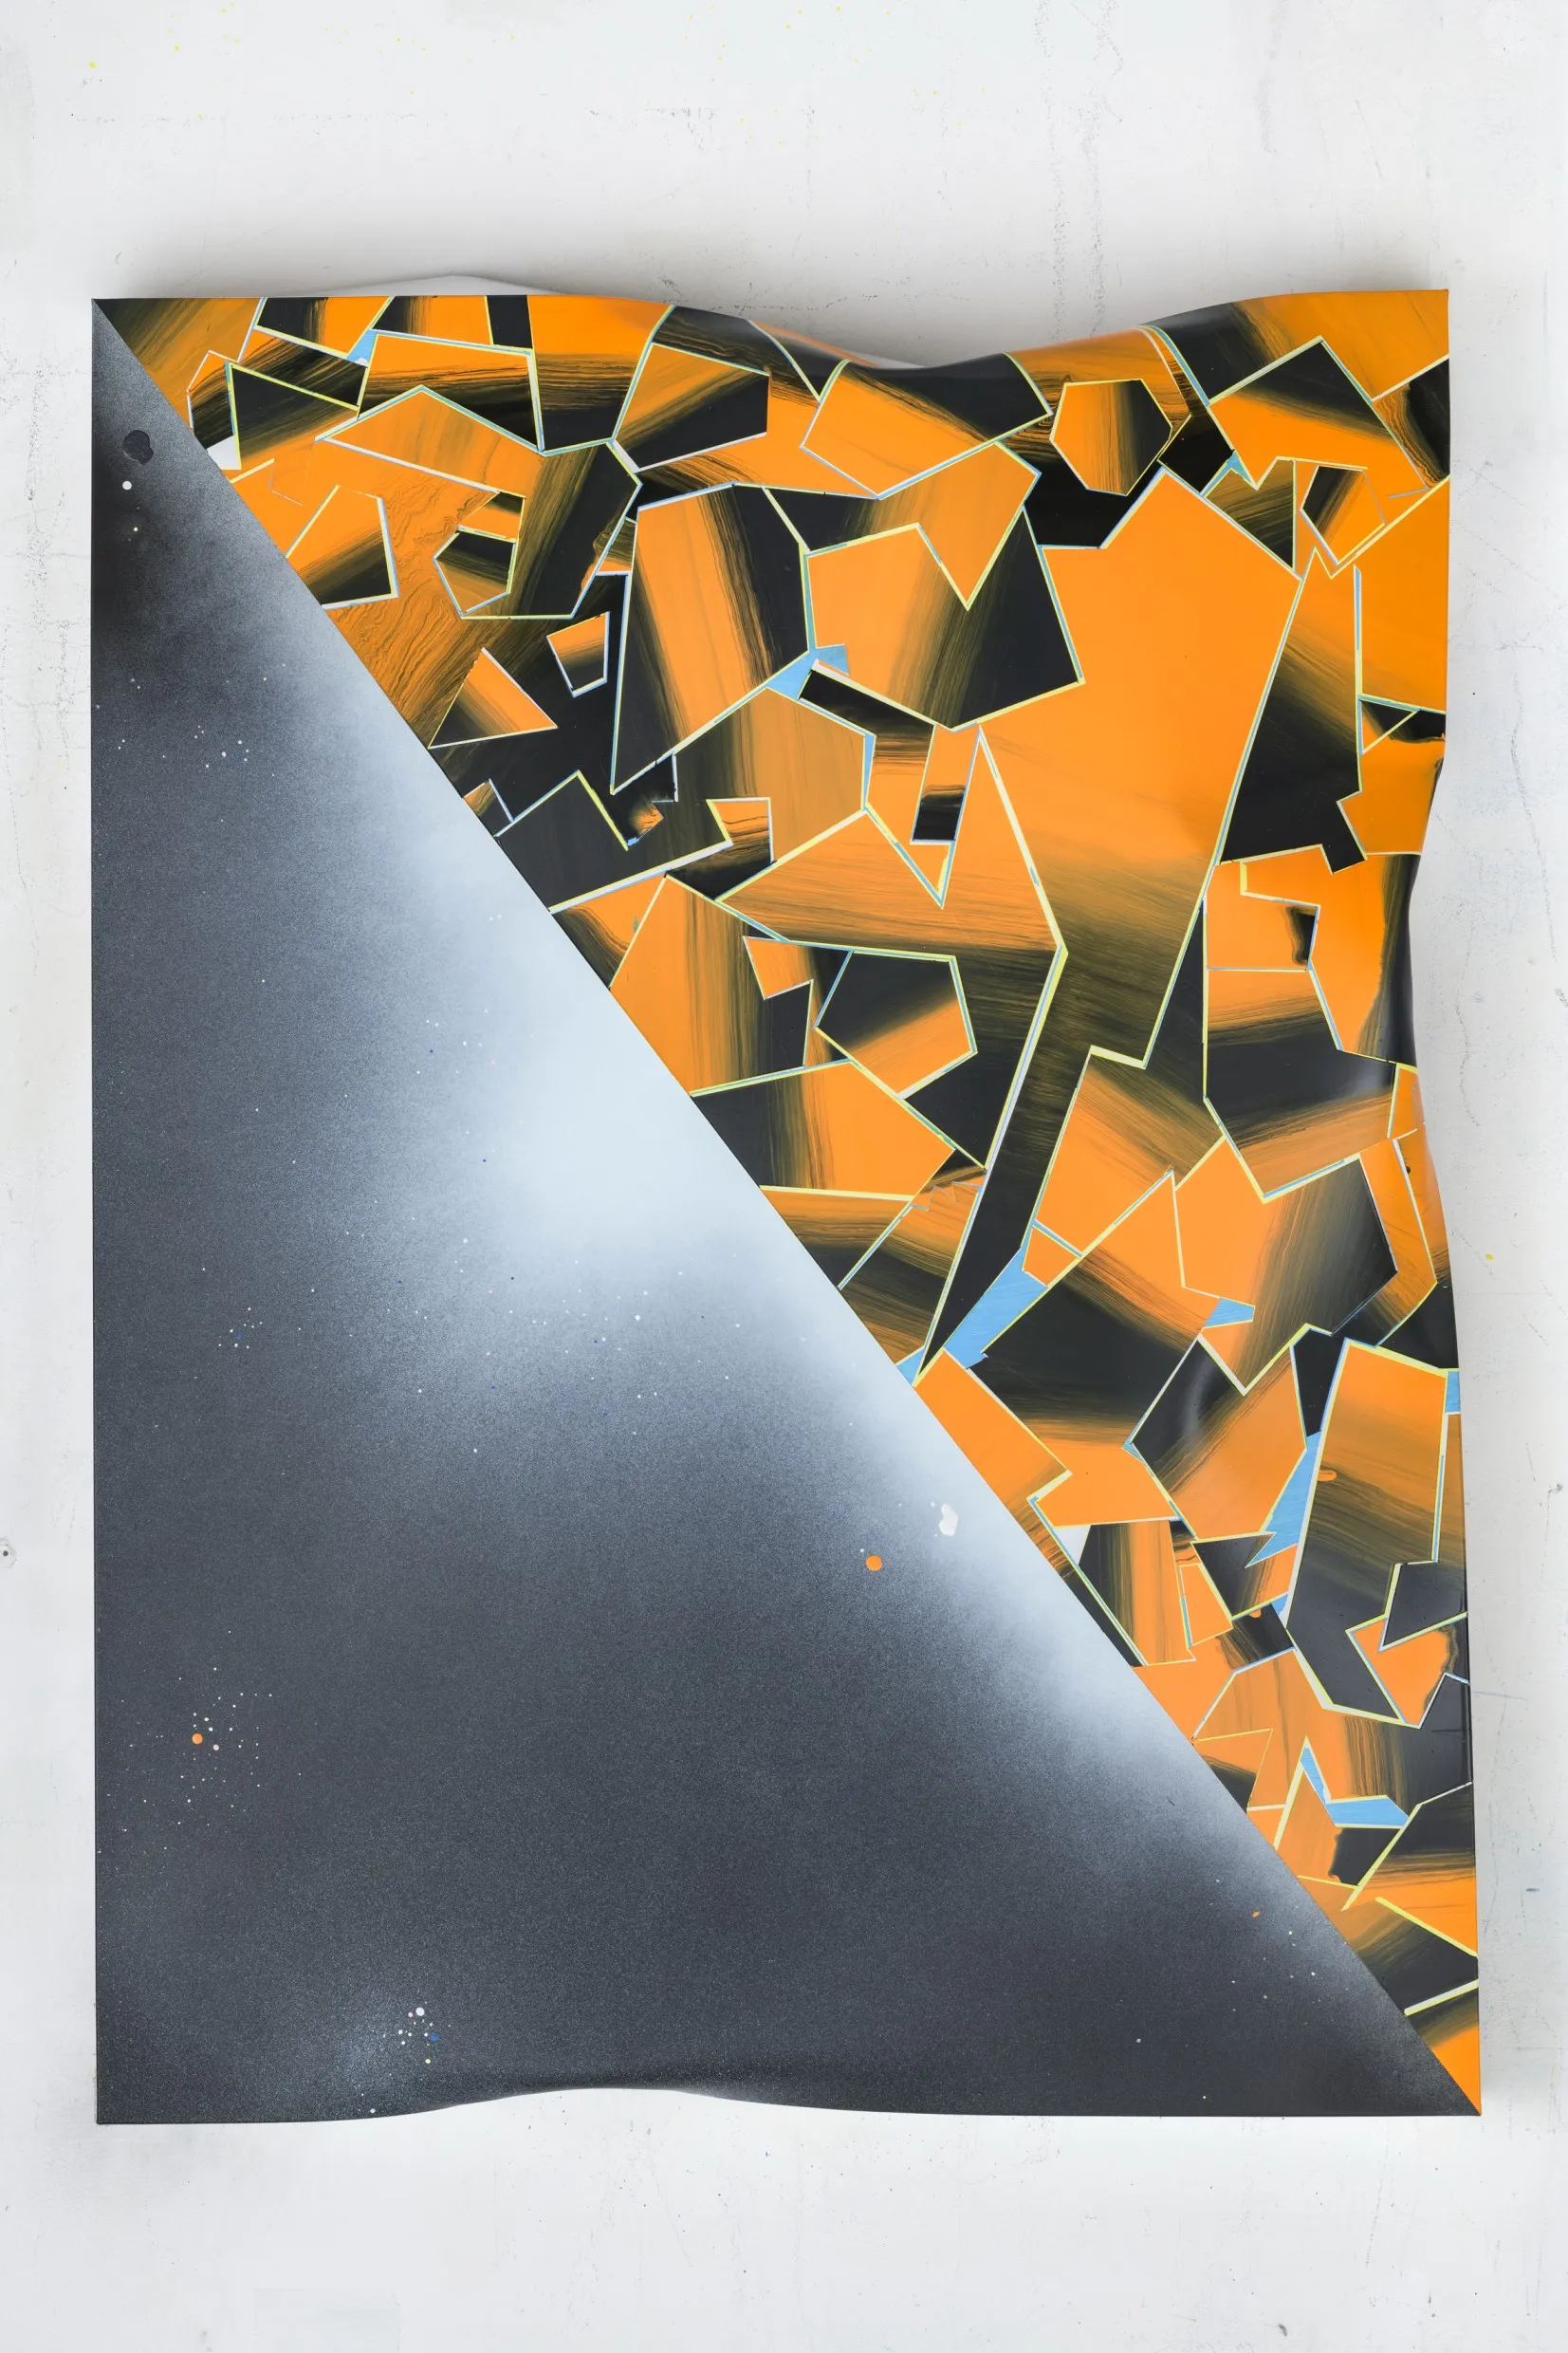 A dented, sculptural metal plate featuring a diagonal division, with a black-to-white gradient on one side and predominantly orange geometric shapes on the other.